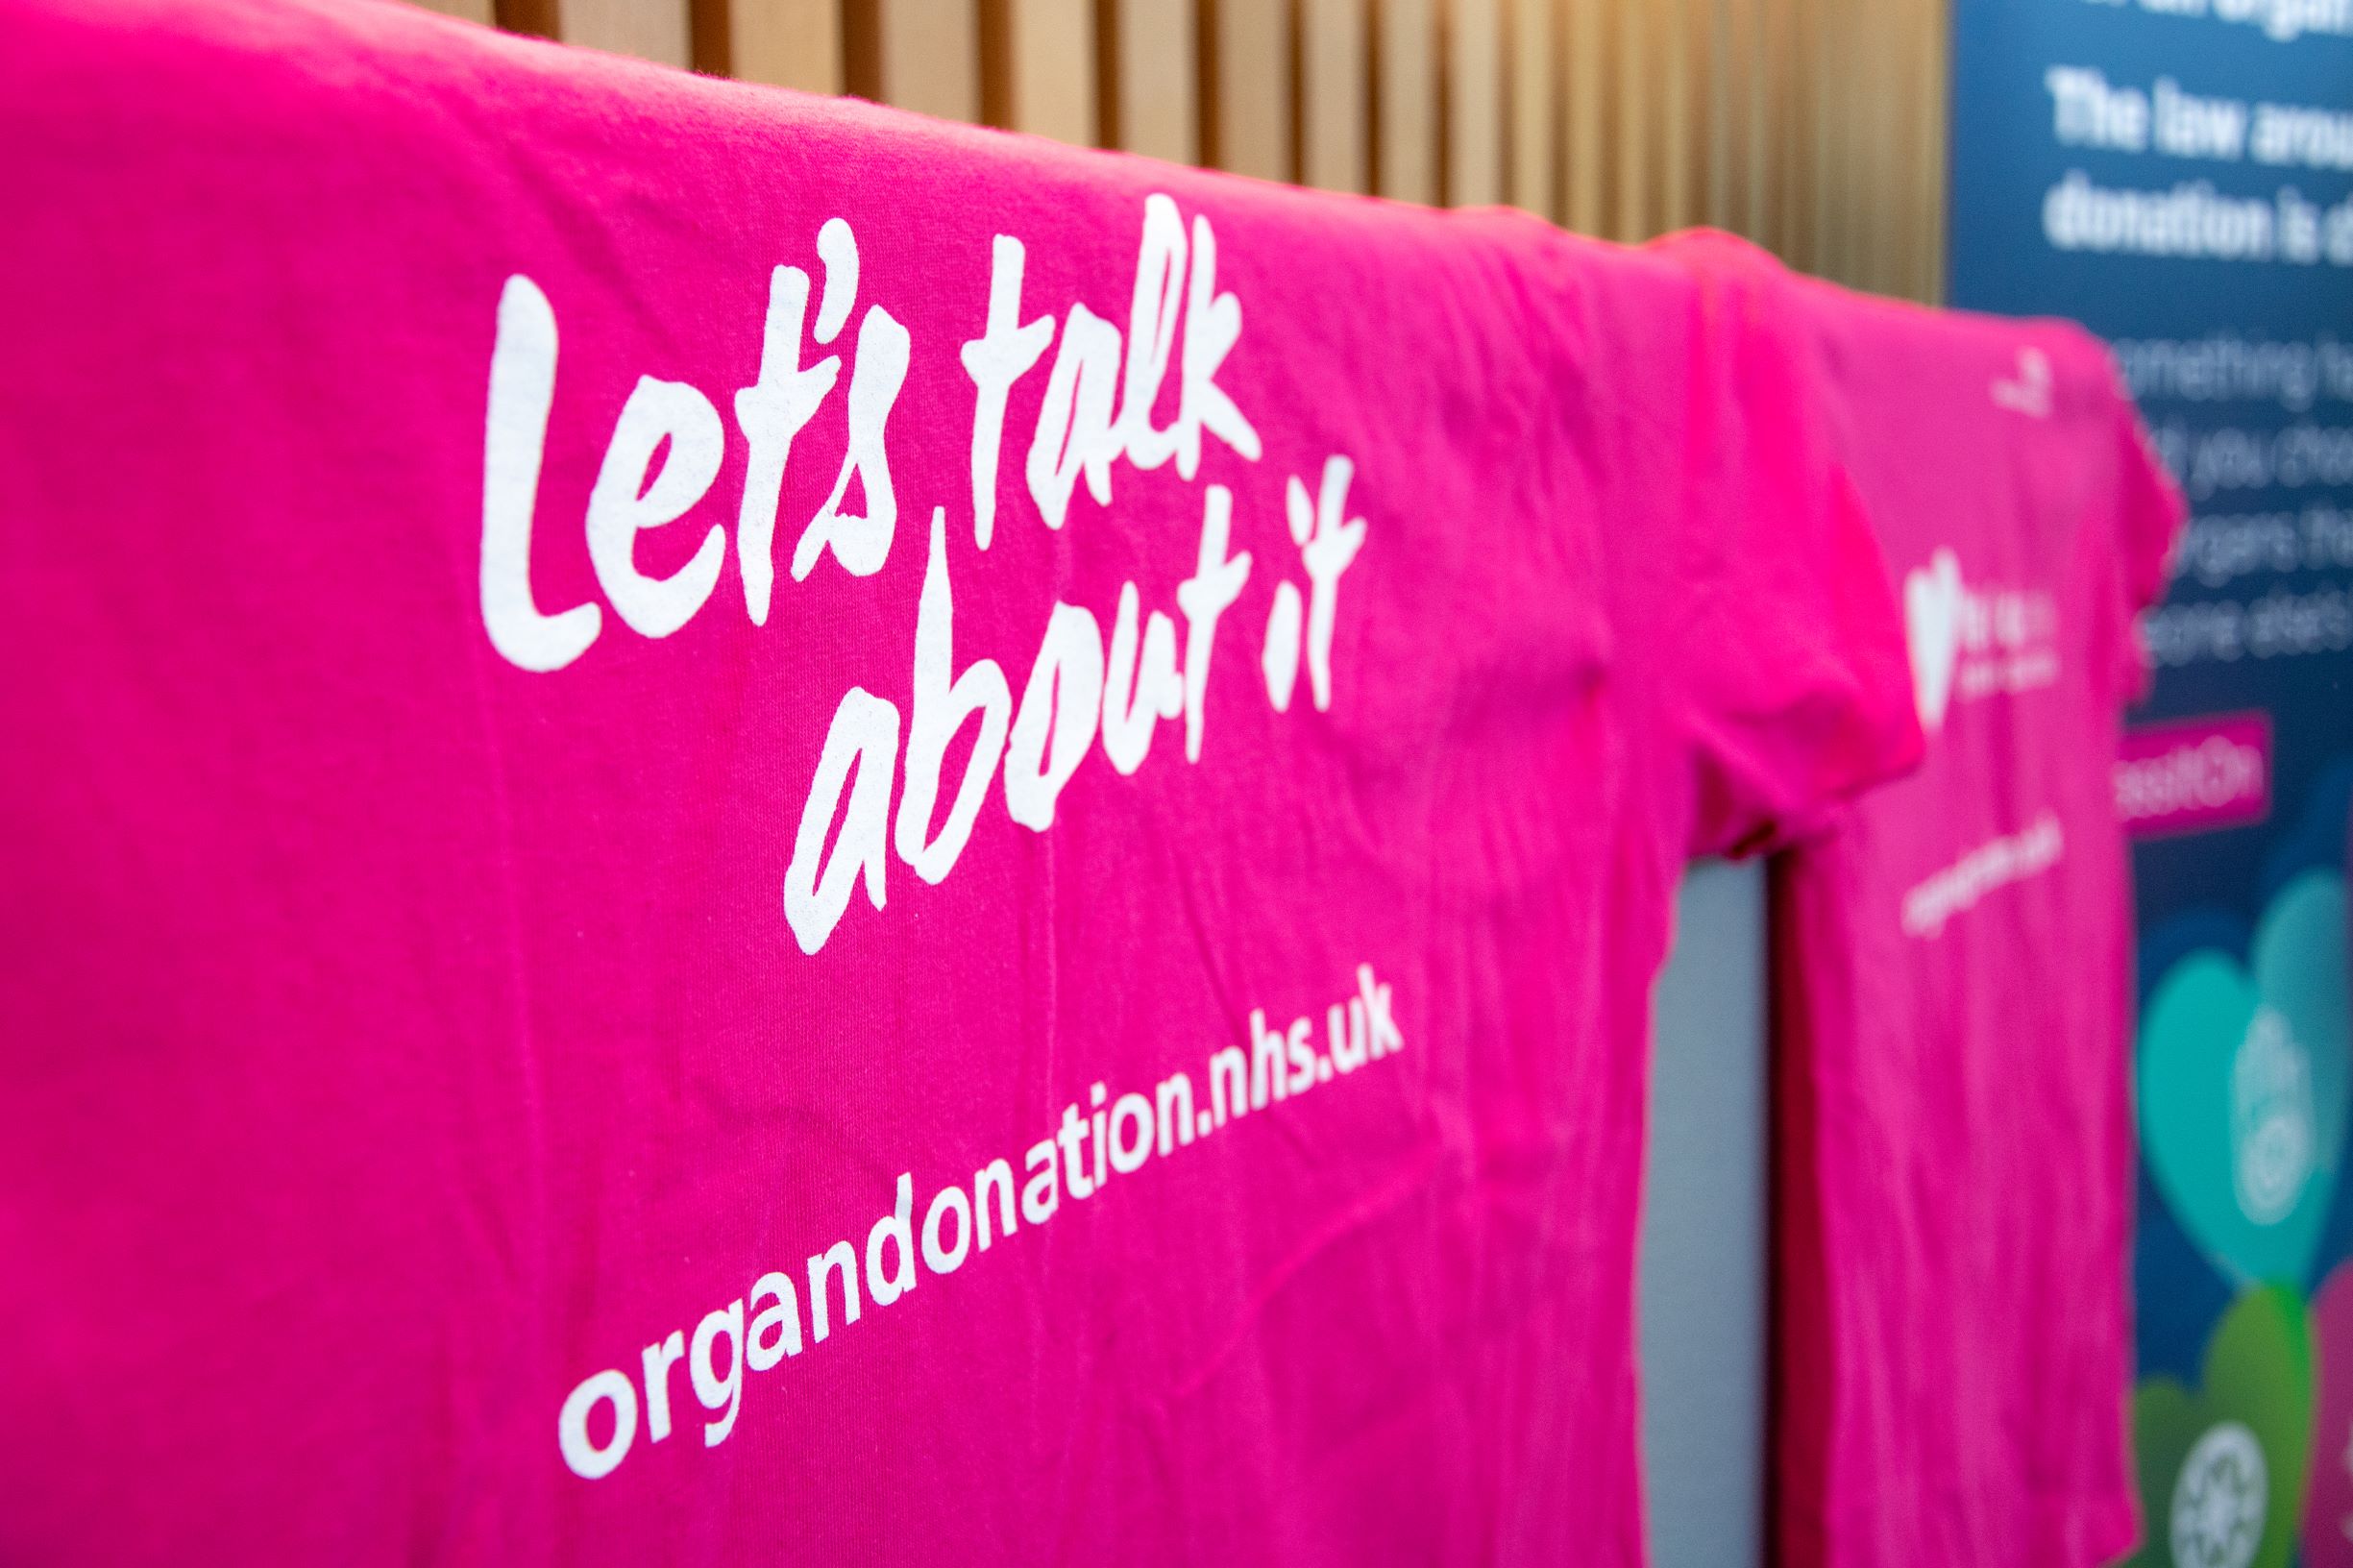 Bradford College receives £10,000 boost to promote organ donation amongst Black and Asian communities